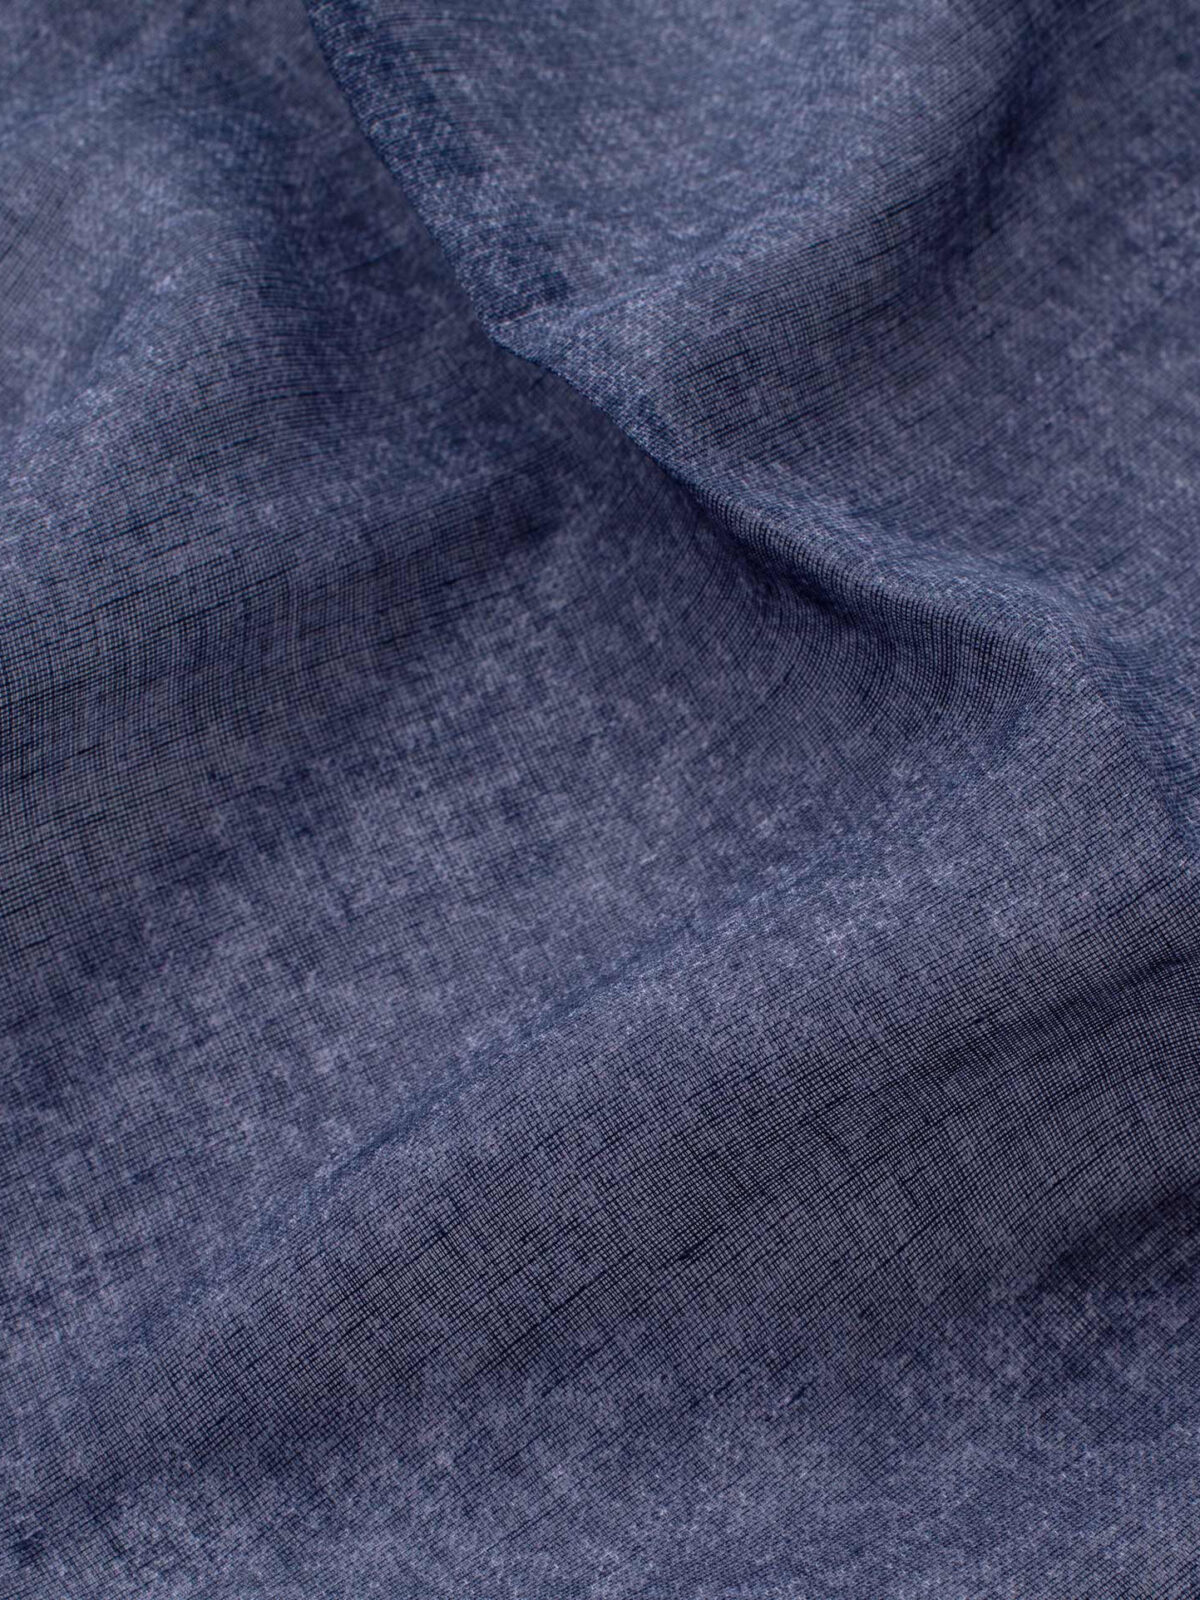 Navy Tipped Tonal Cotton and Linen Pocket Square